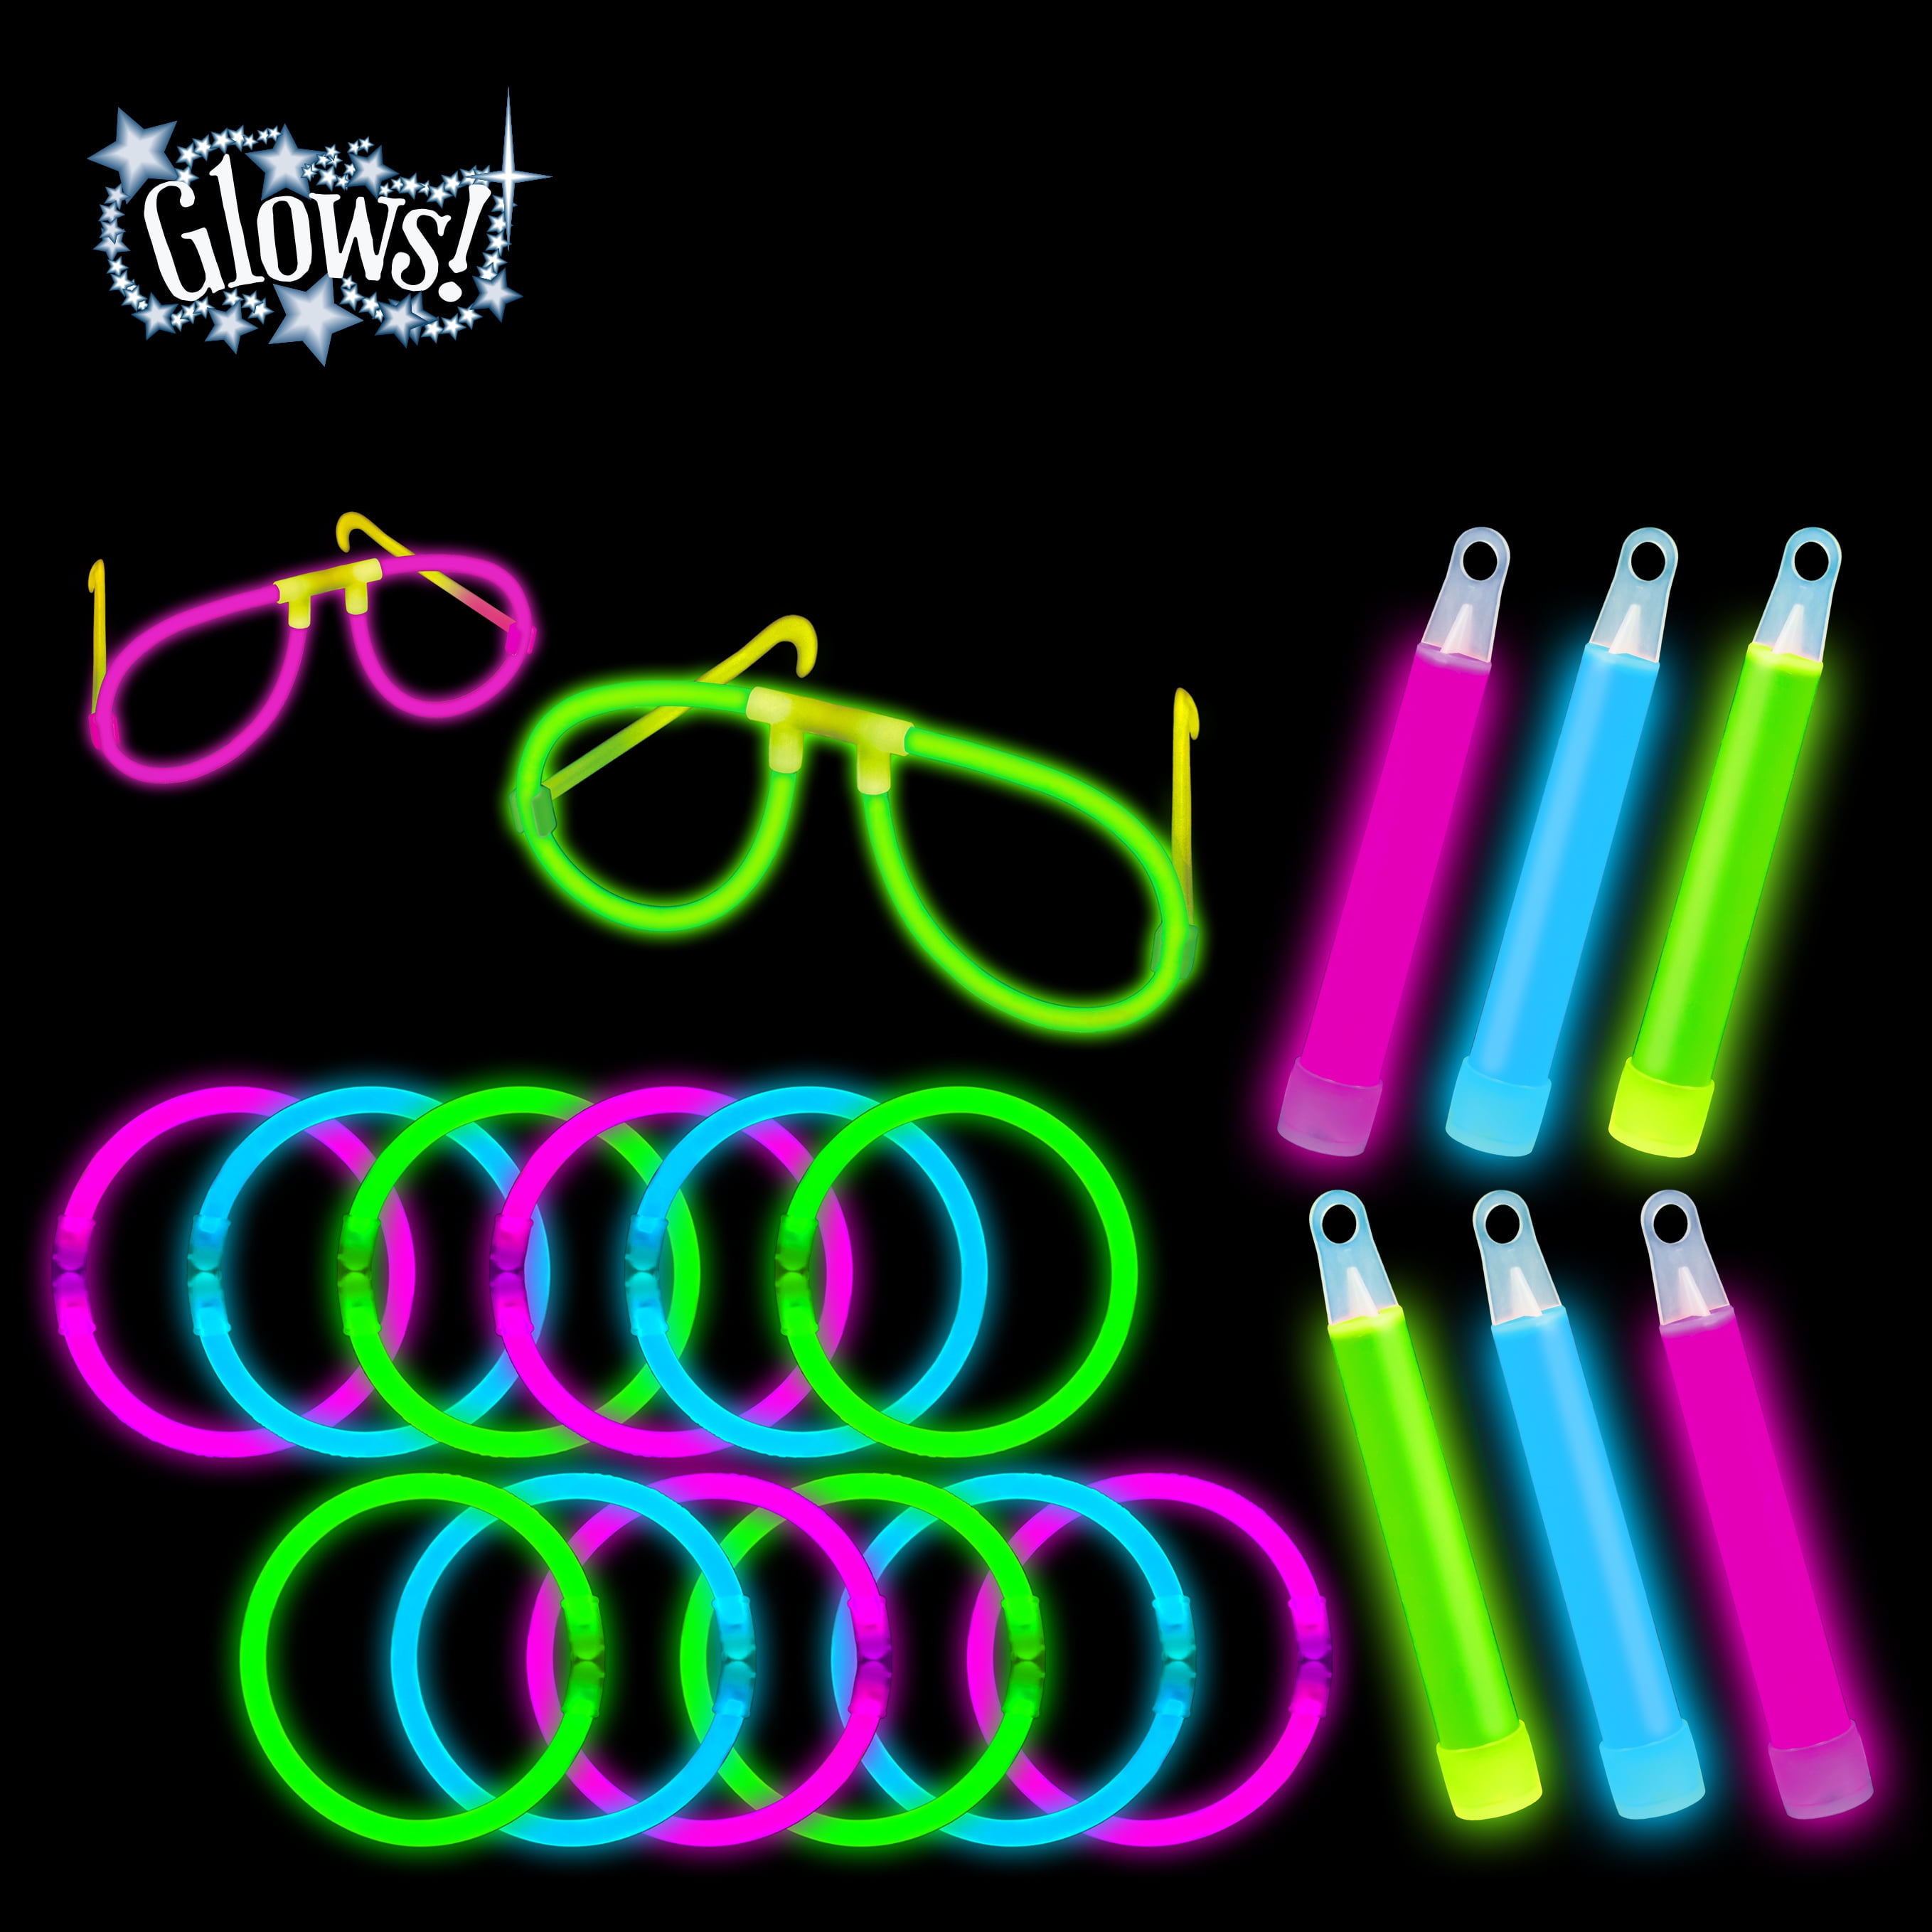 Details about   1500x 8" Glow In The Dark Sticks 8 Colors Bracelets Necklaces Party Favors Pack 